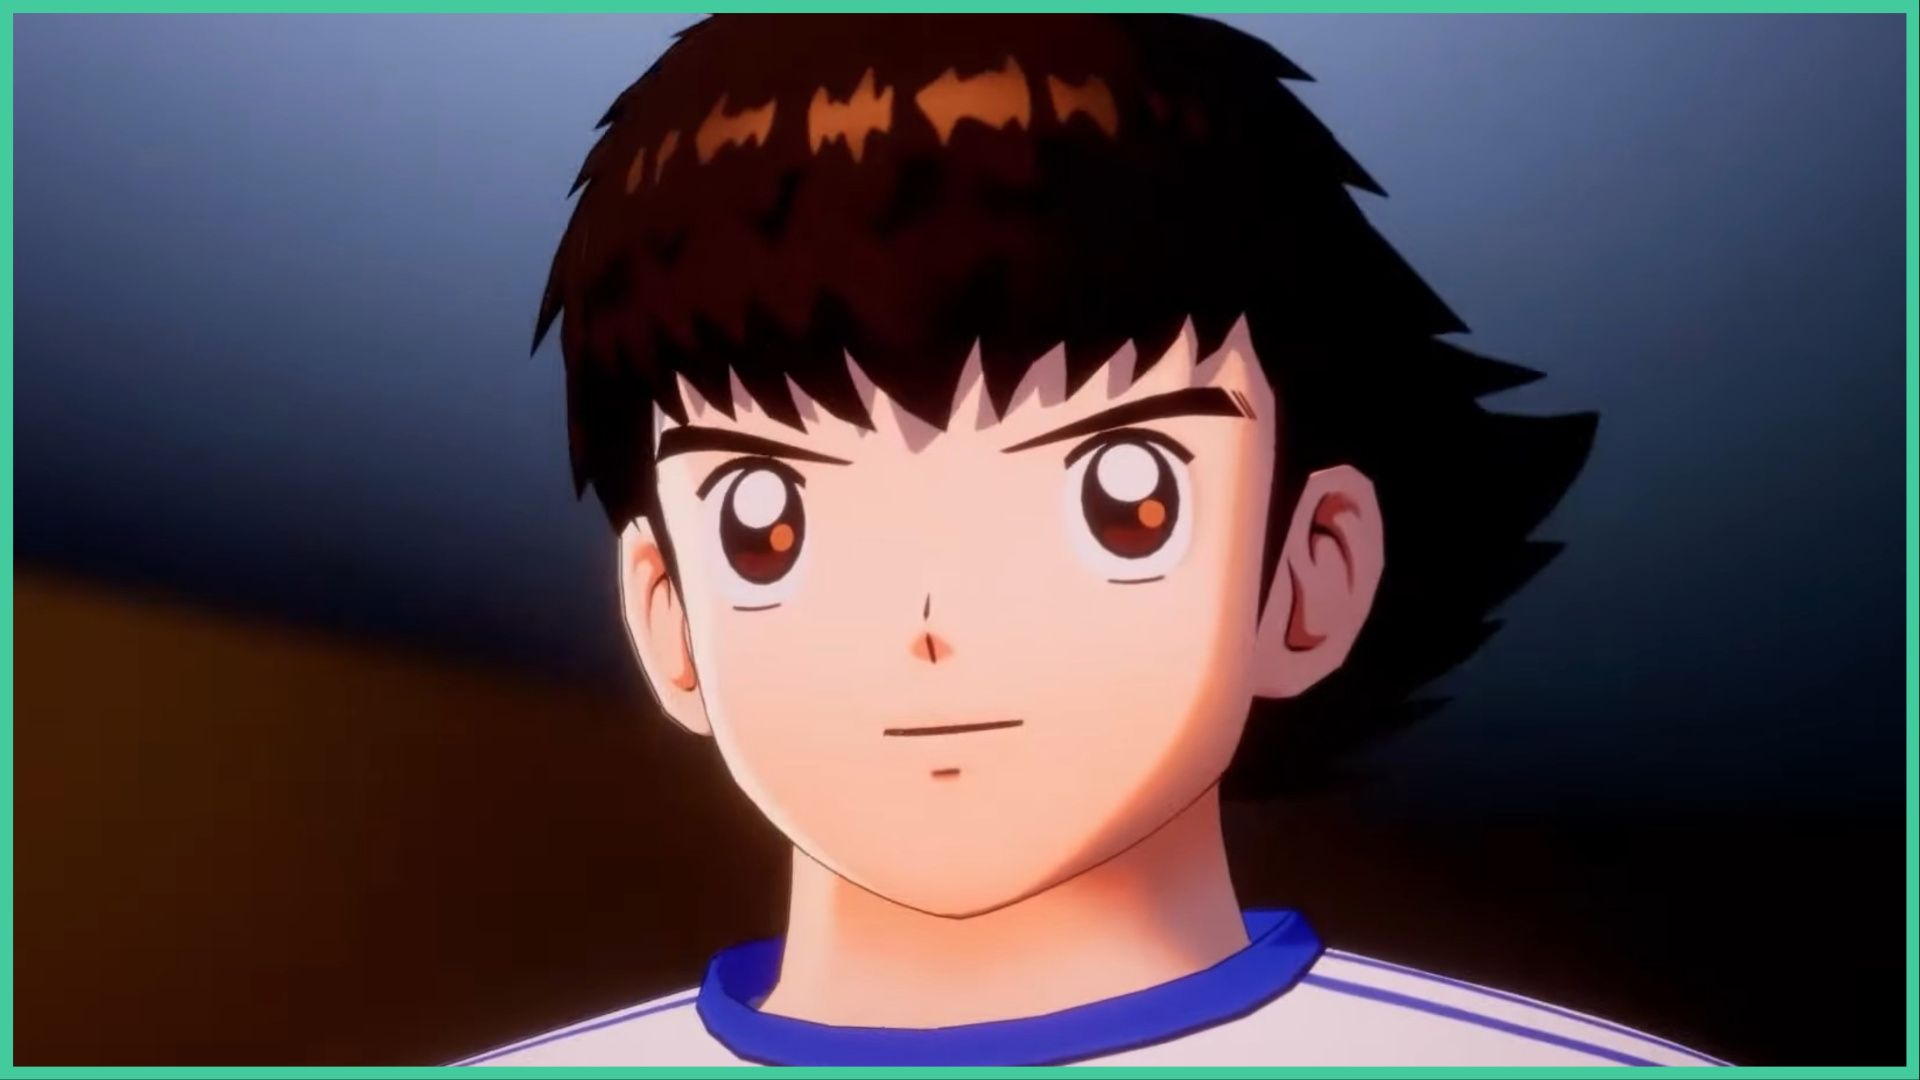 feature image for our captain tsubasa ace reroll guide, the image features a screenshot from the game's launch trailer of a 3D version of tsubasa from the series as he has a determined smile on his face as he makes his way to the football pitch